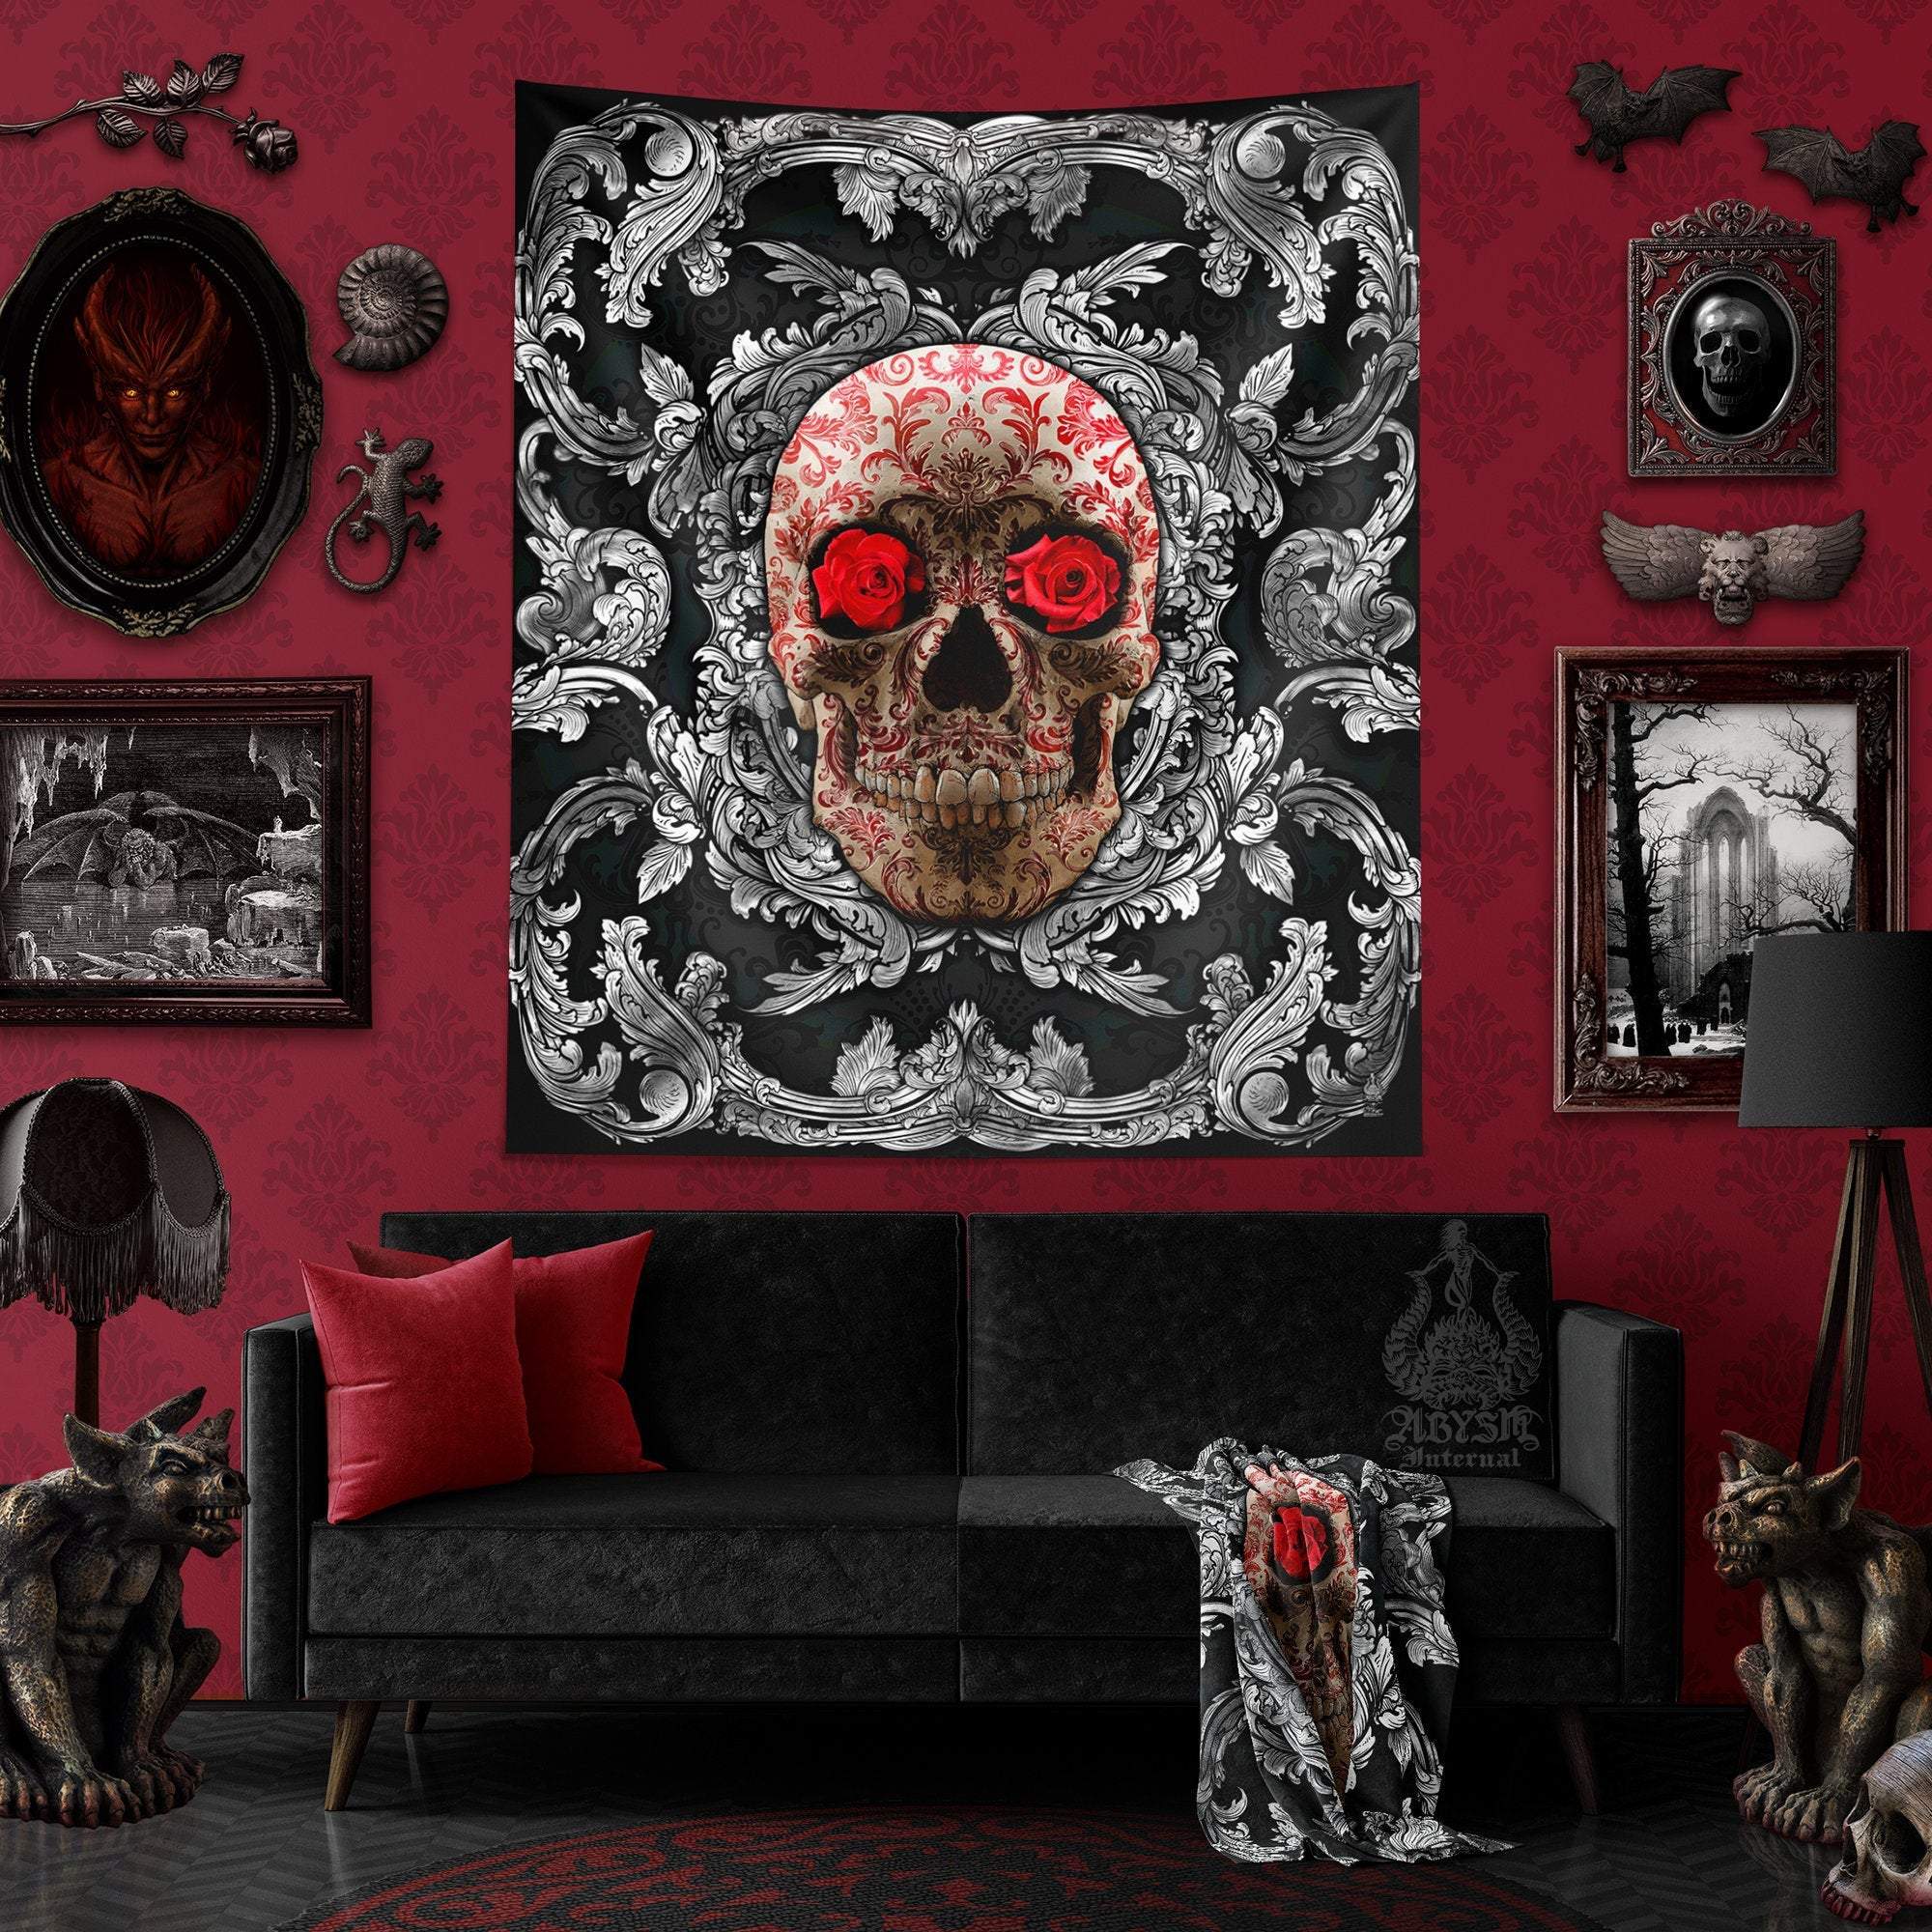 Skull Tapestry, Macabre Wall Hanging, Goth Home Decor, Art Print - Silver & Red Roses - Abysm Internal